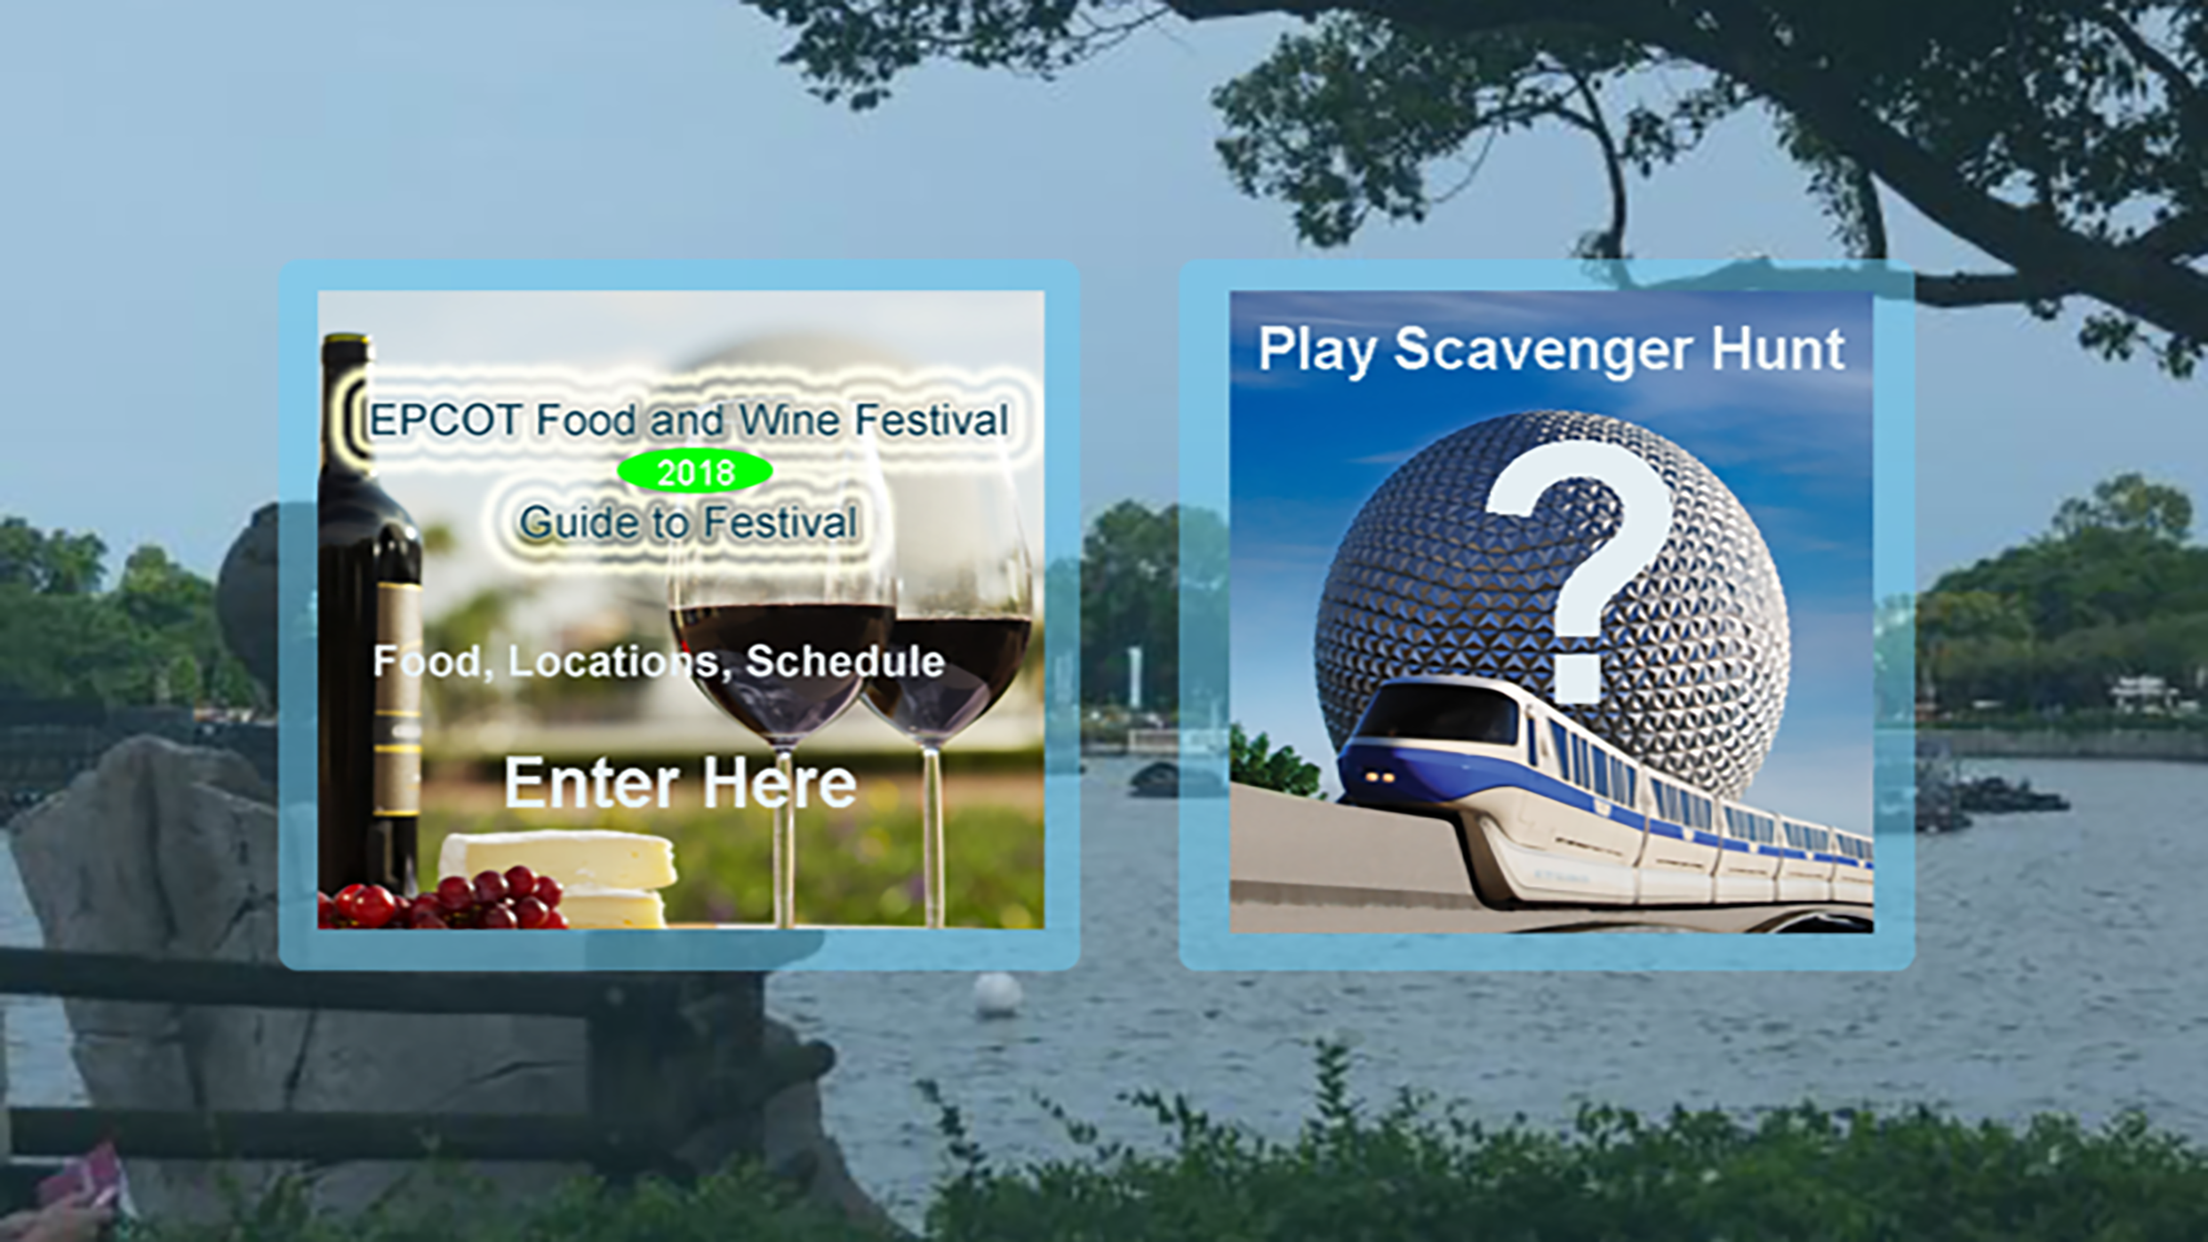 App for Food and Wine at EPCOT